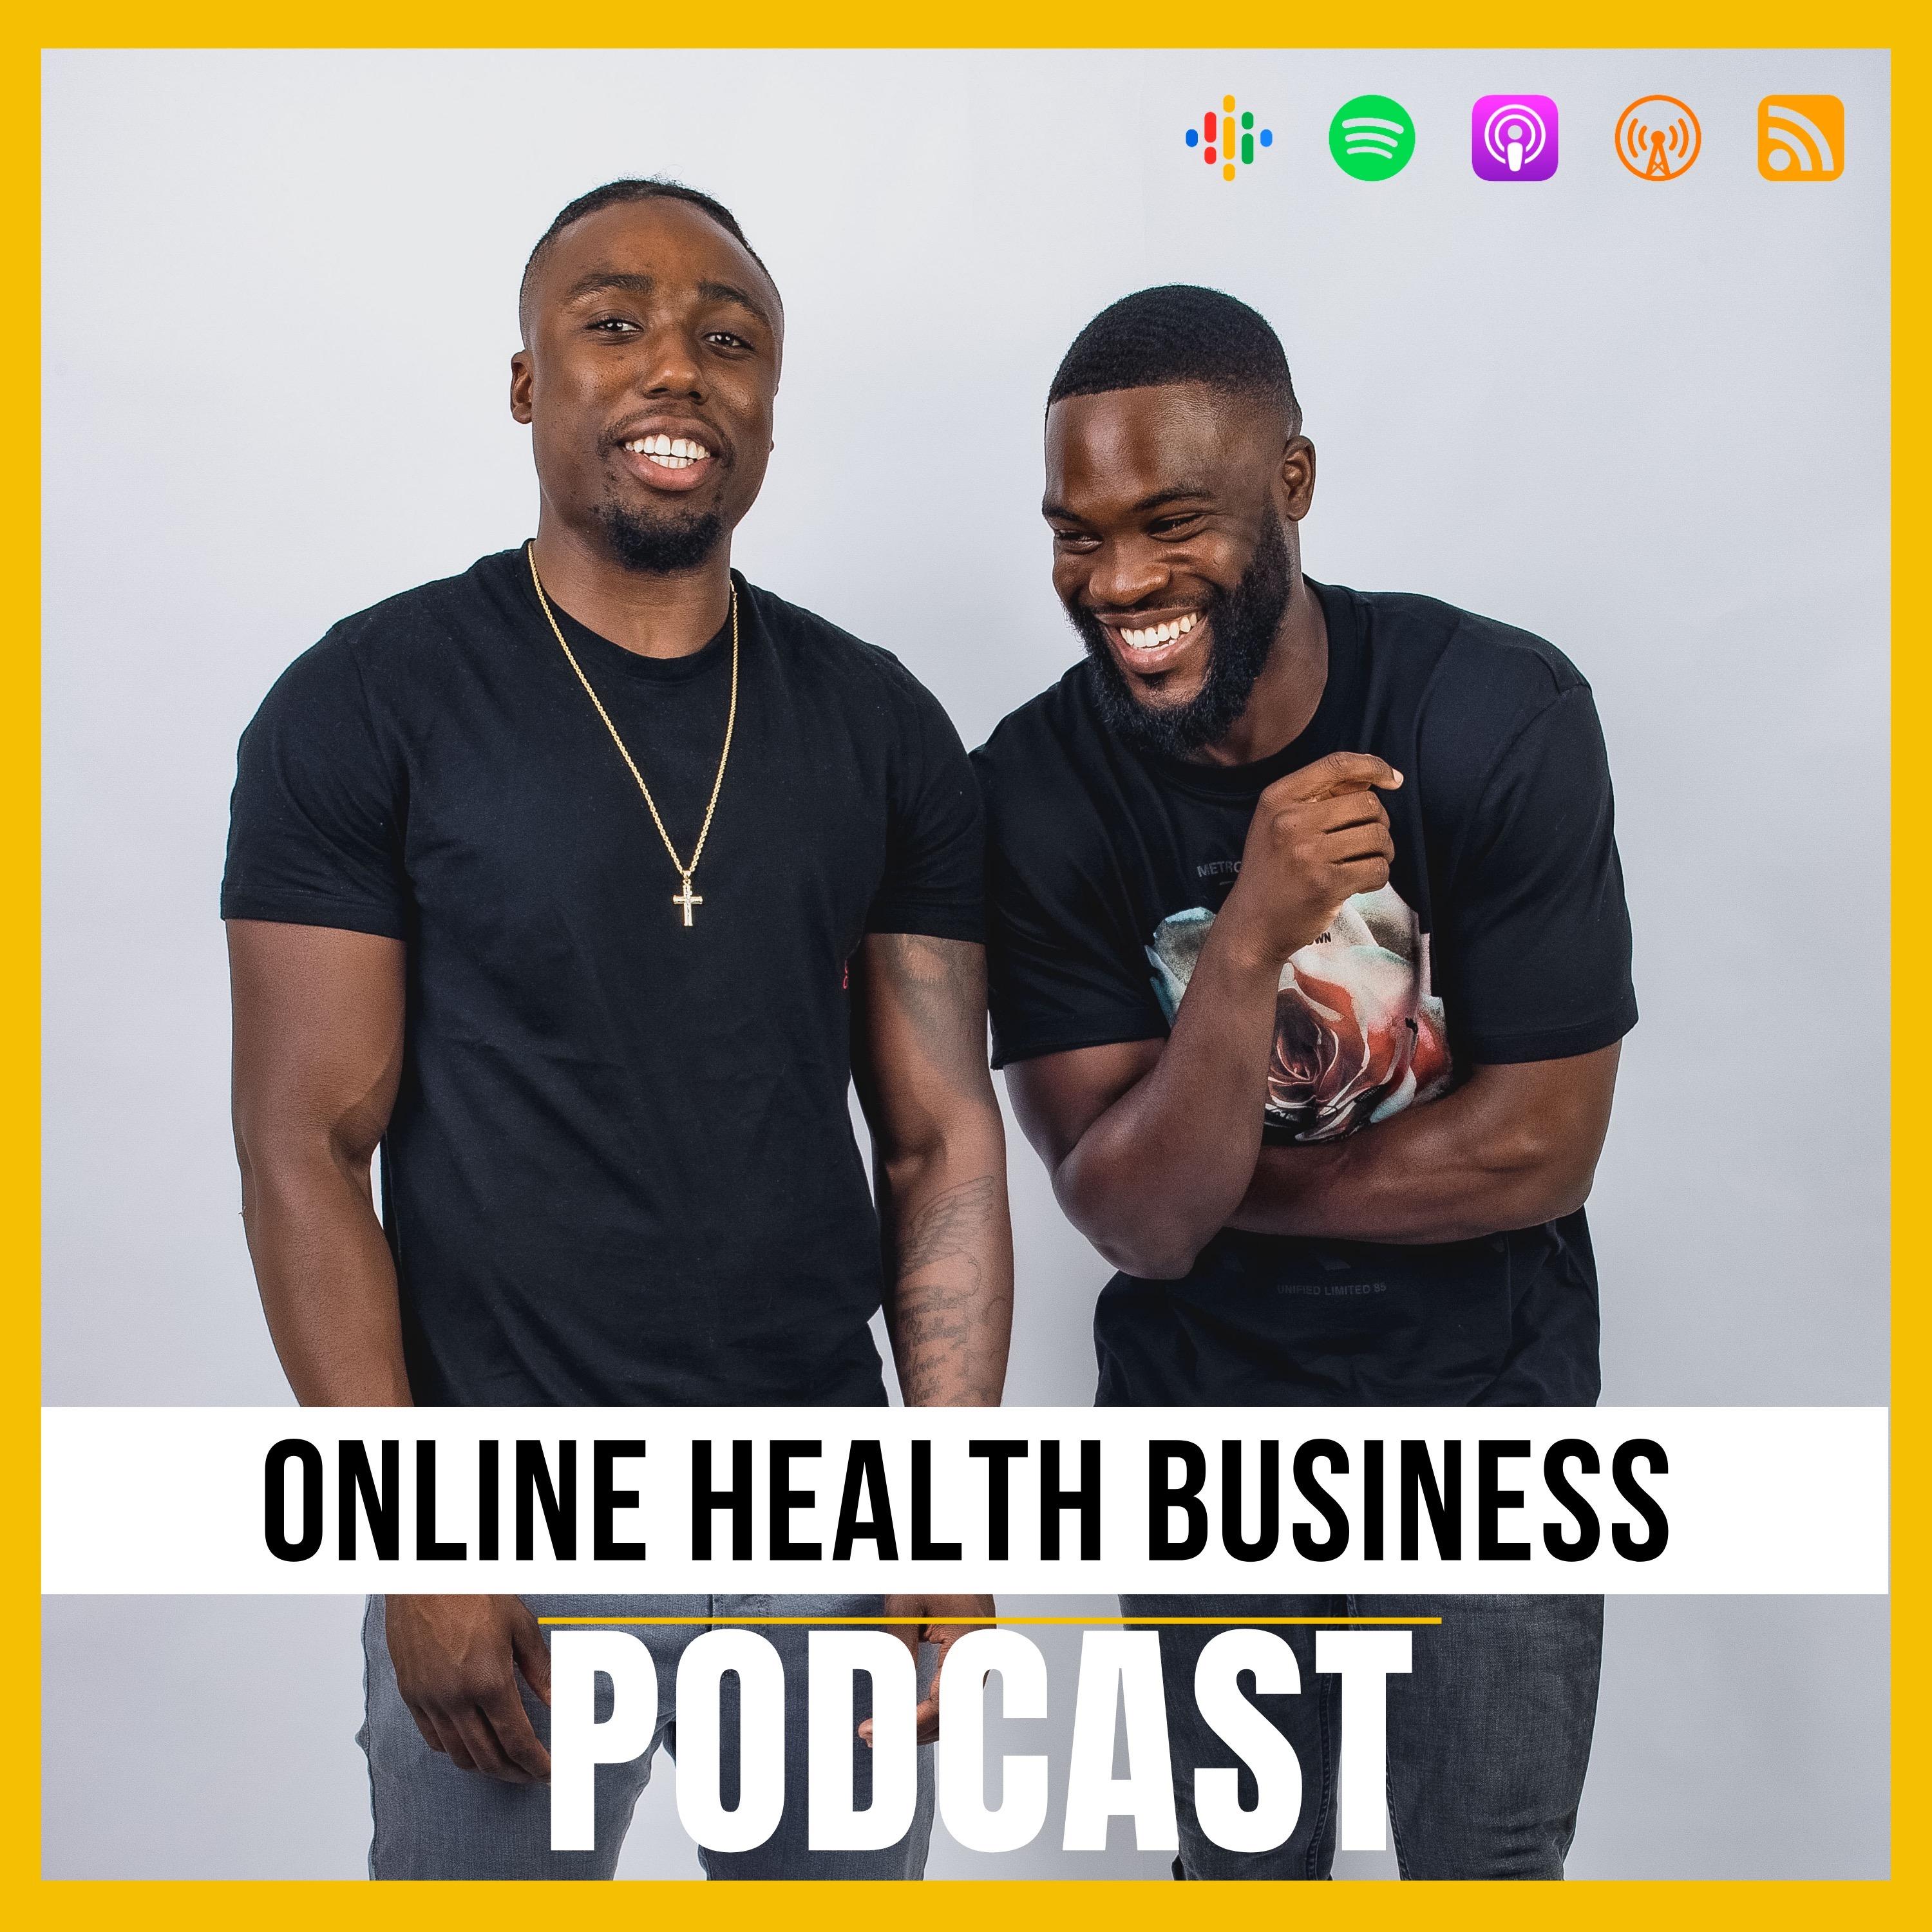 The Online Health Business Podcast